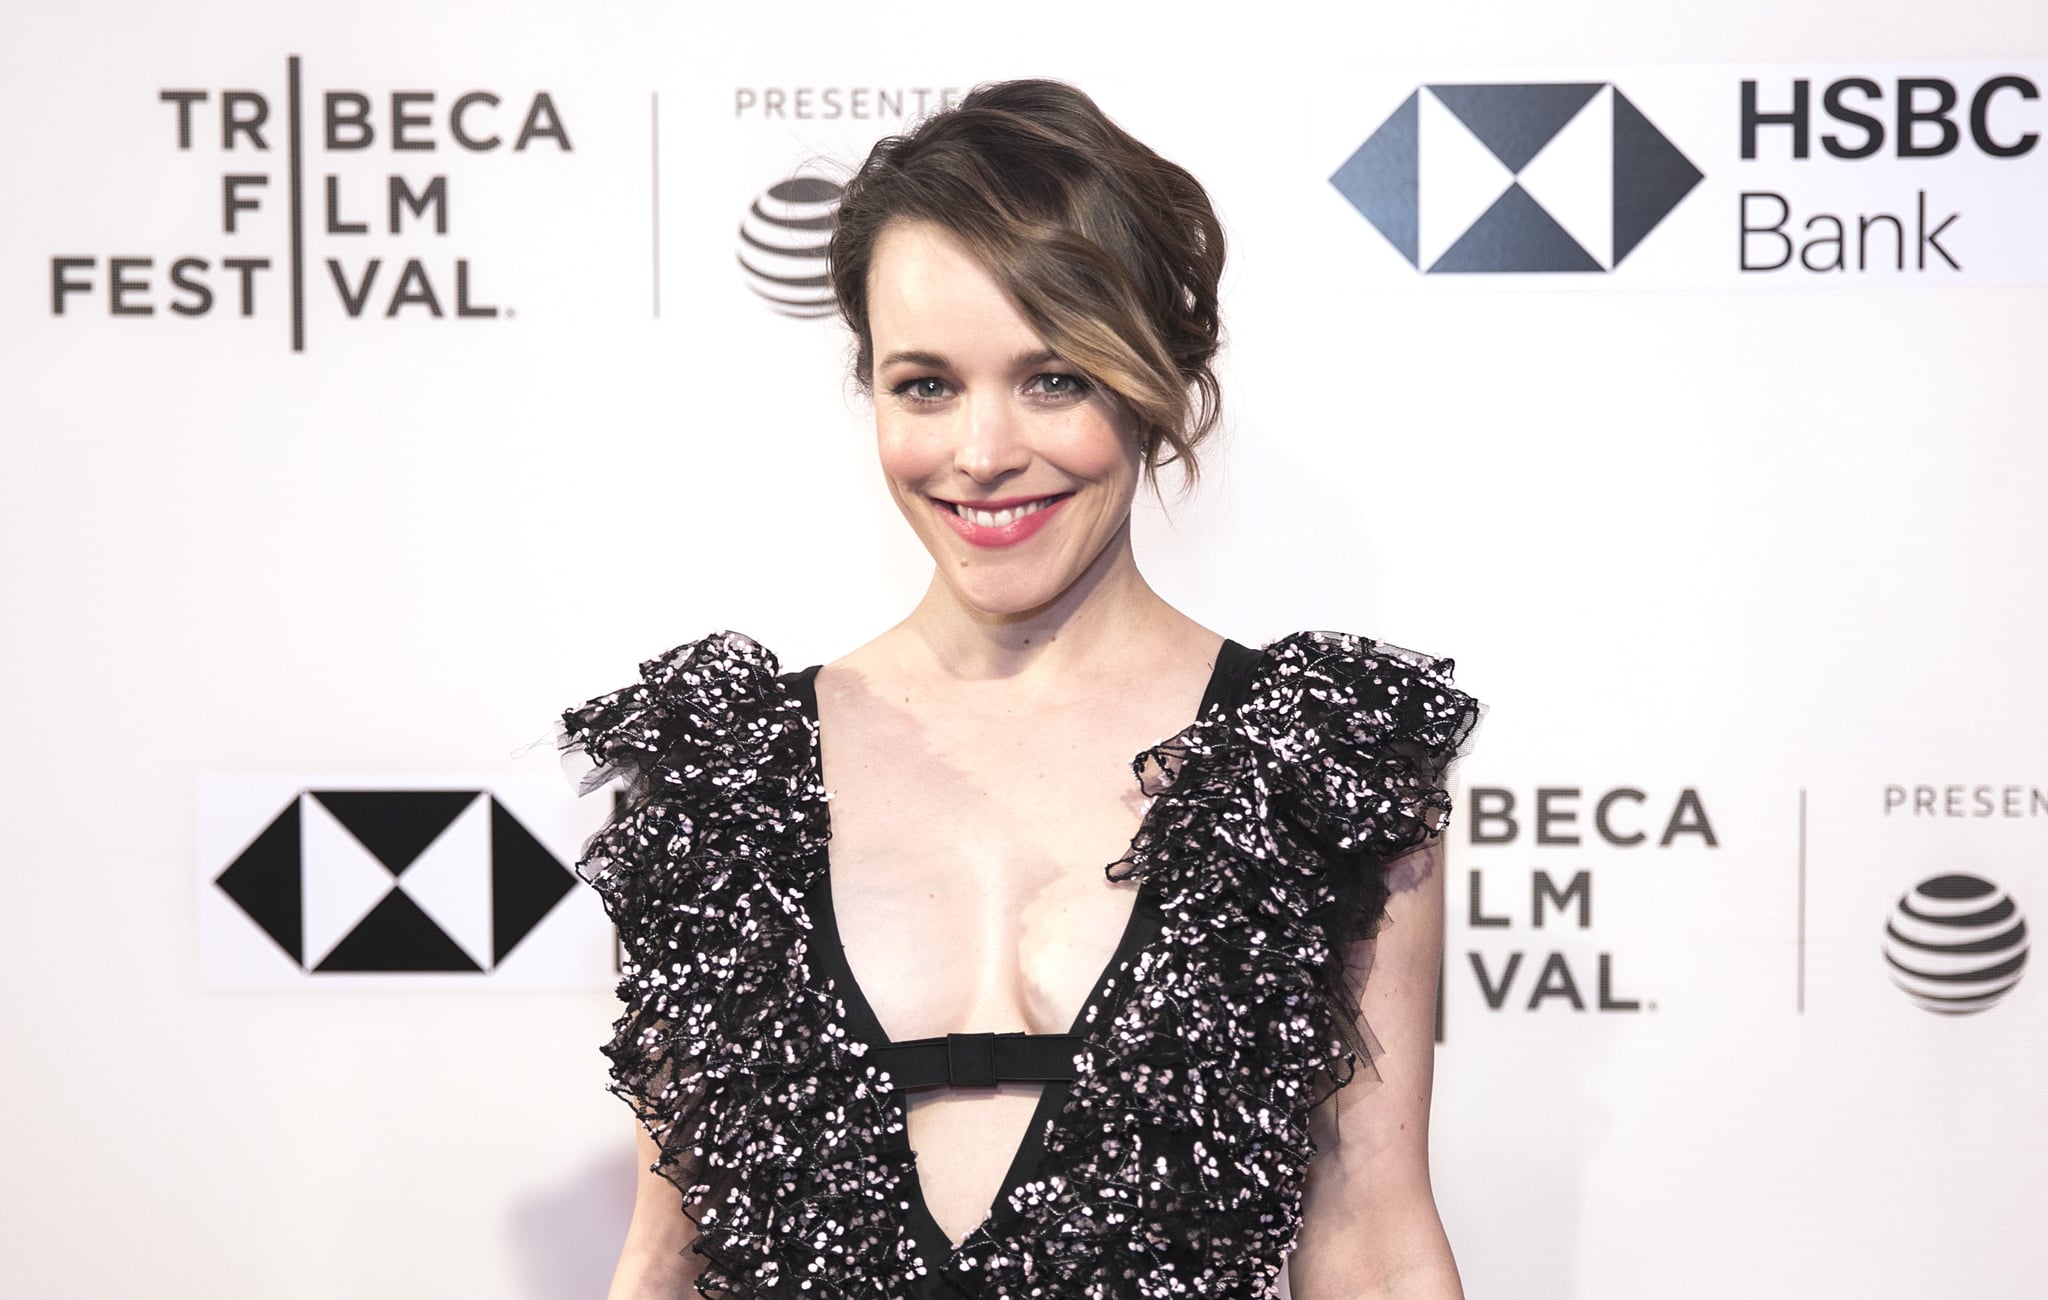 NEW YORK, USA - APRIL 24: Rachel McAdams attends a screening of 'Disobedience' during the Tribeca Film Festival at the BMCC Tribeca PAC in New York, United States on April 24, 2018. (Photo by Atilgan Ozdil/Anadolu Agency/Getty Images)